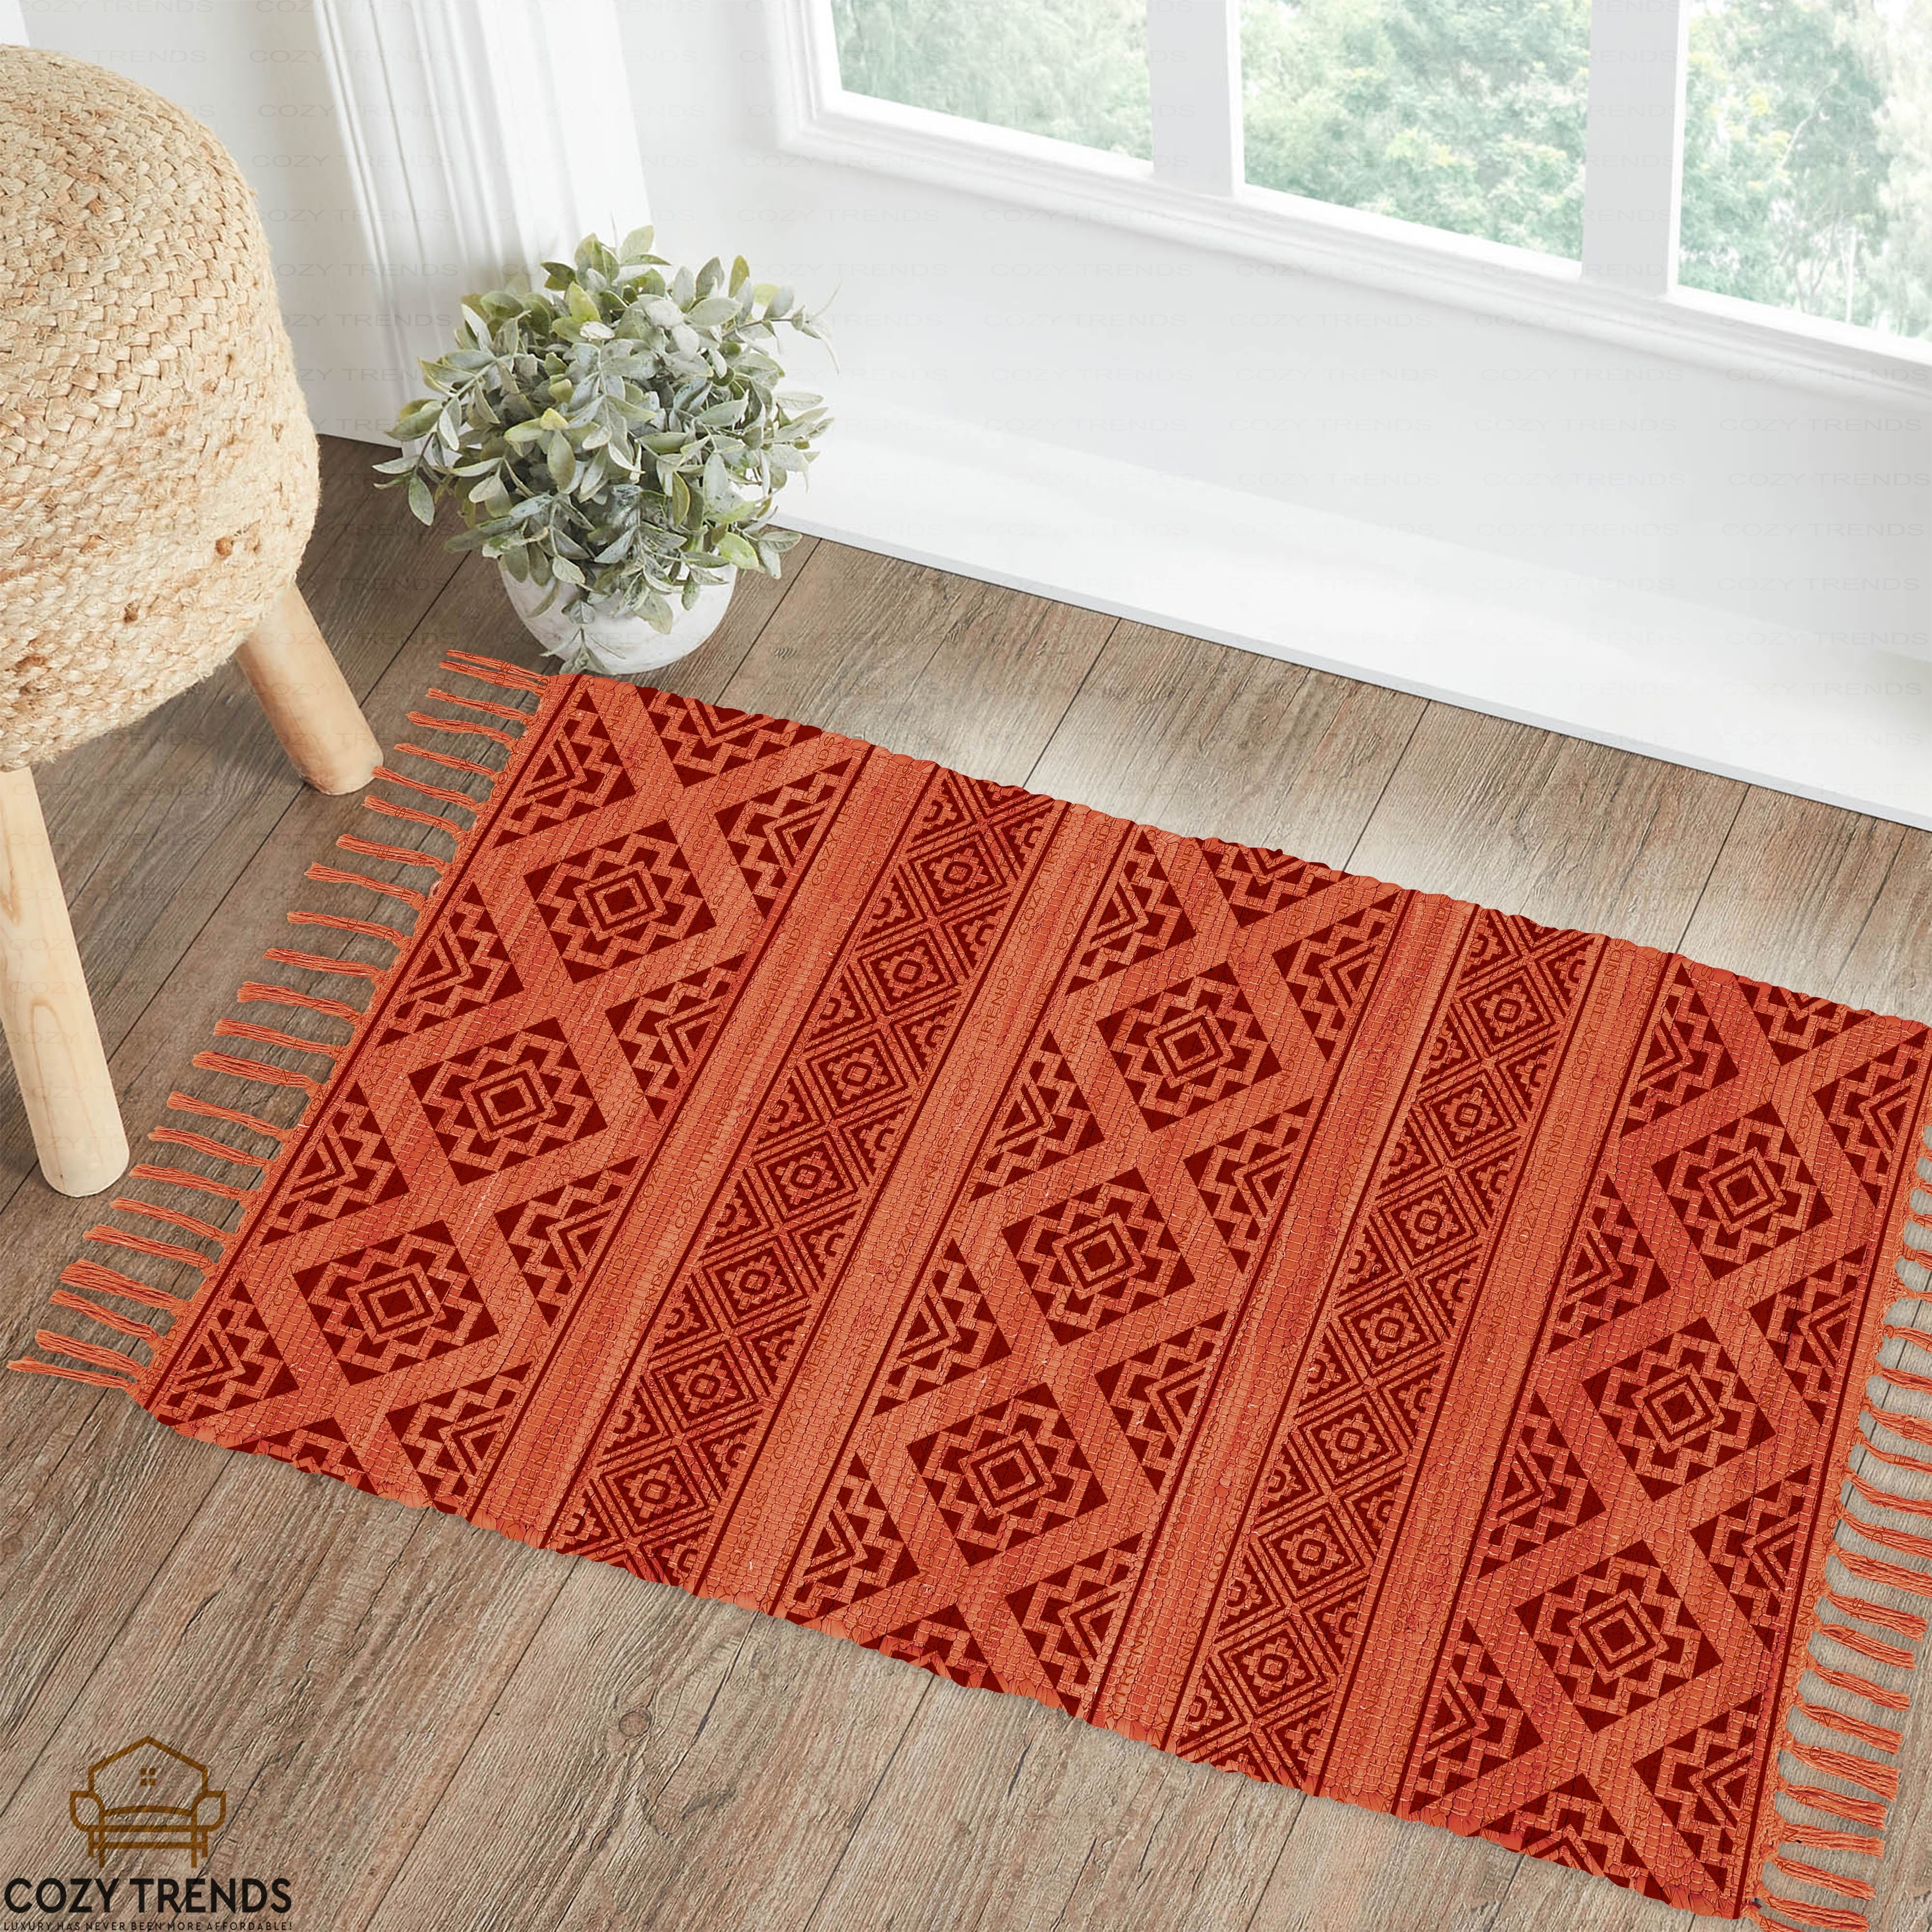 https://ak1.ostkcdn.com/images/products/is/images/direct/9e4c2e52c1d15298e253124f57bb127ffe705619/Boho-Rug-2%27x3%27%2C-Printed-Small-Rug-with-Tassel-for-Bedroom%2C-Bathroom%2C-Hallway%2C-Laundry%2C-Entryway-Washable-Cotton-Woven-Throw-Rug.jpg